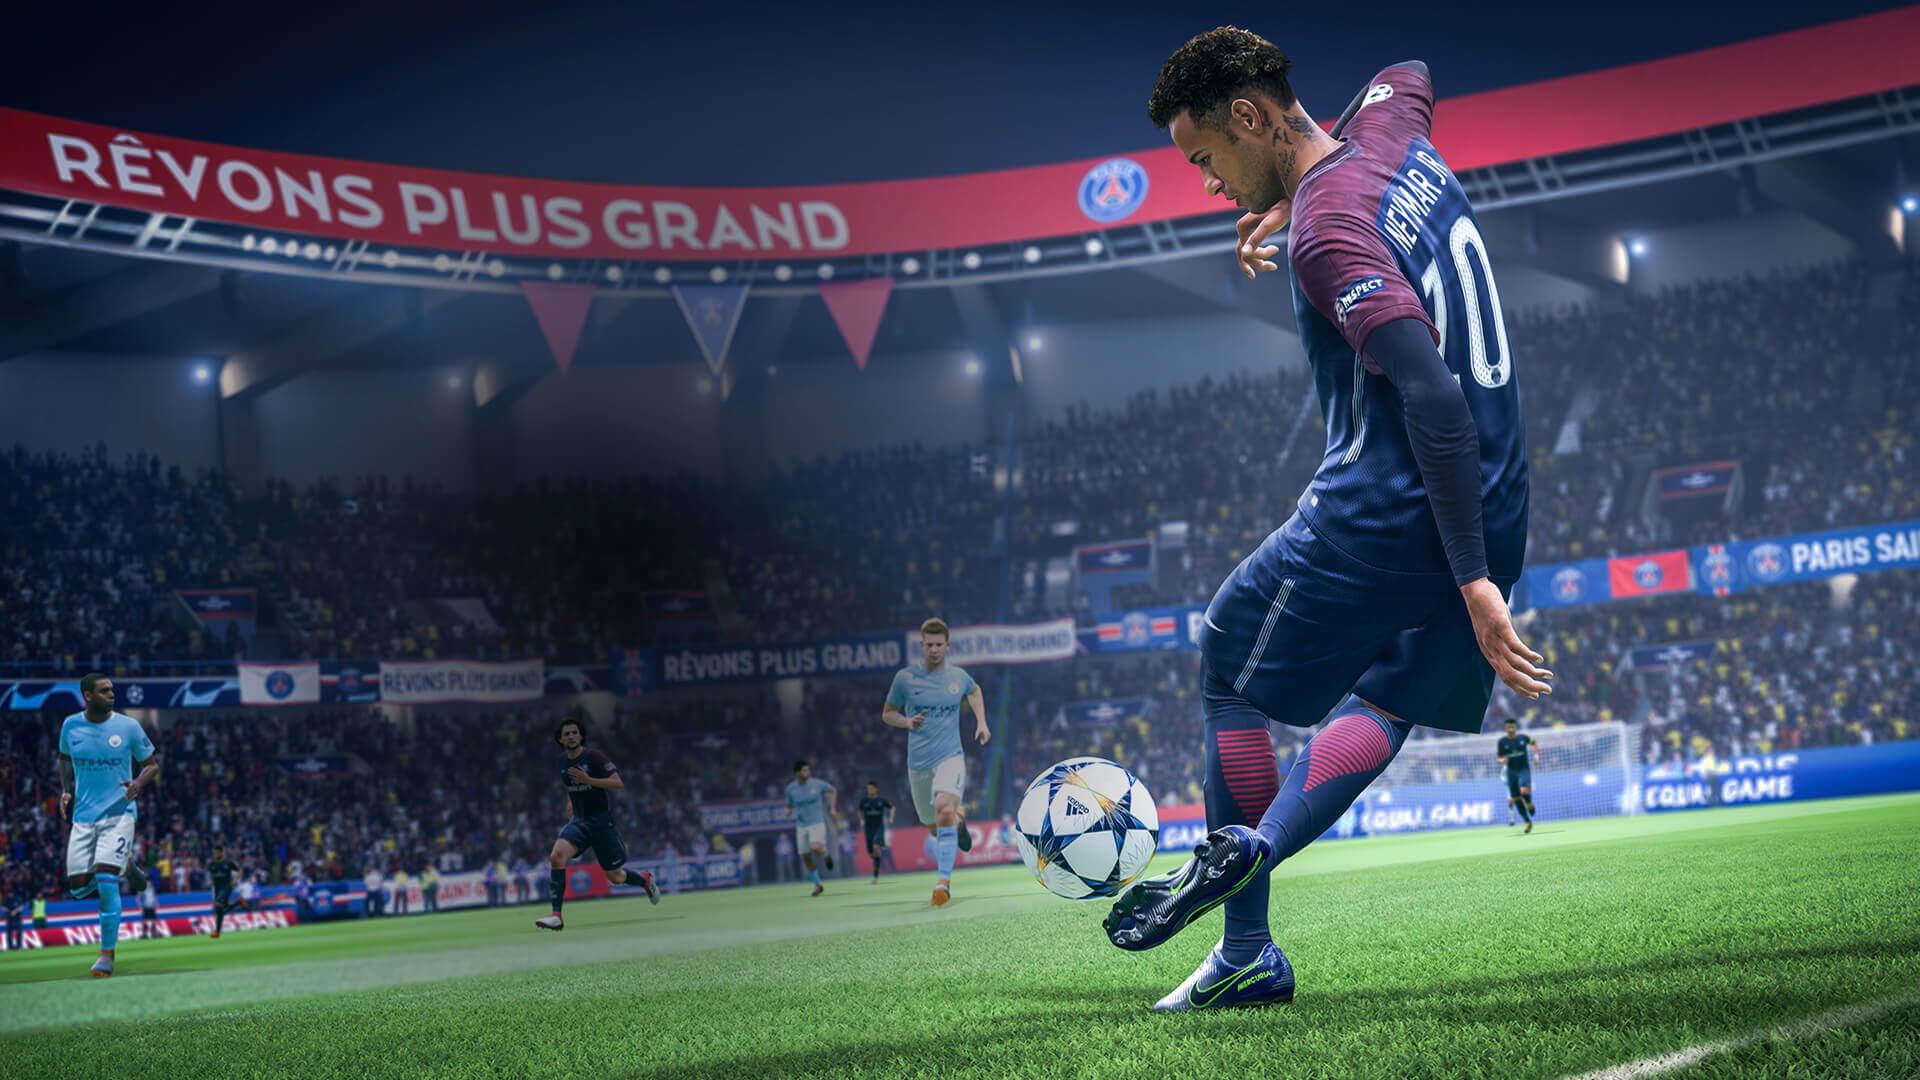 EA announces FIFA Stay and Play Cup virtual tournament in lieu of real soccer